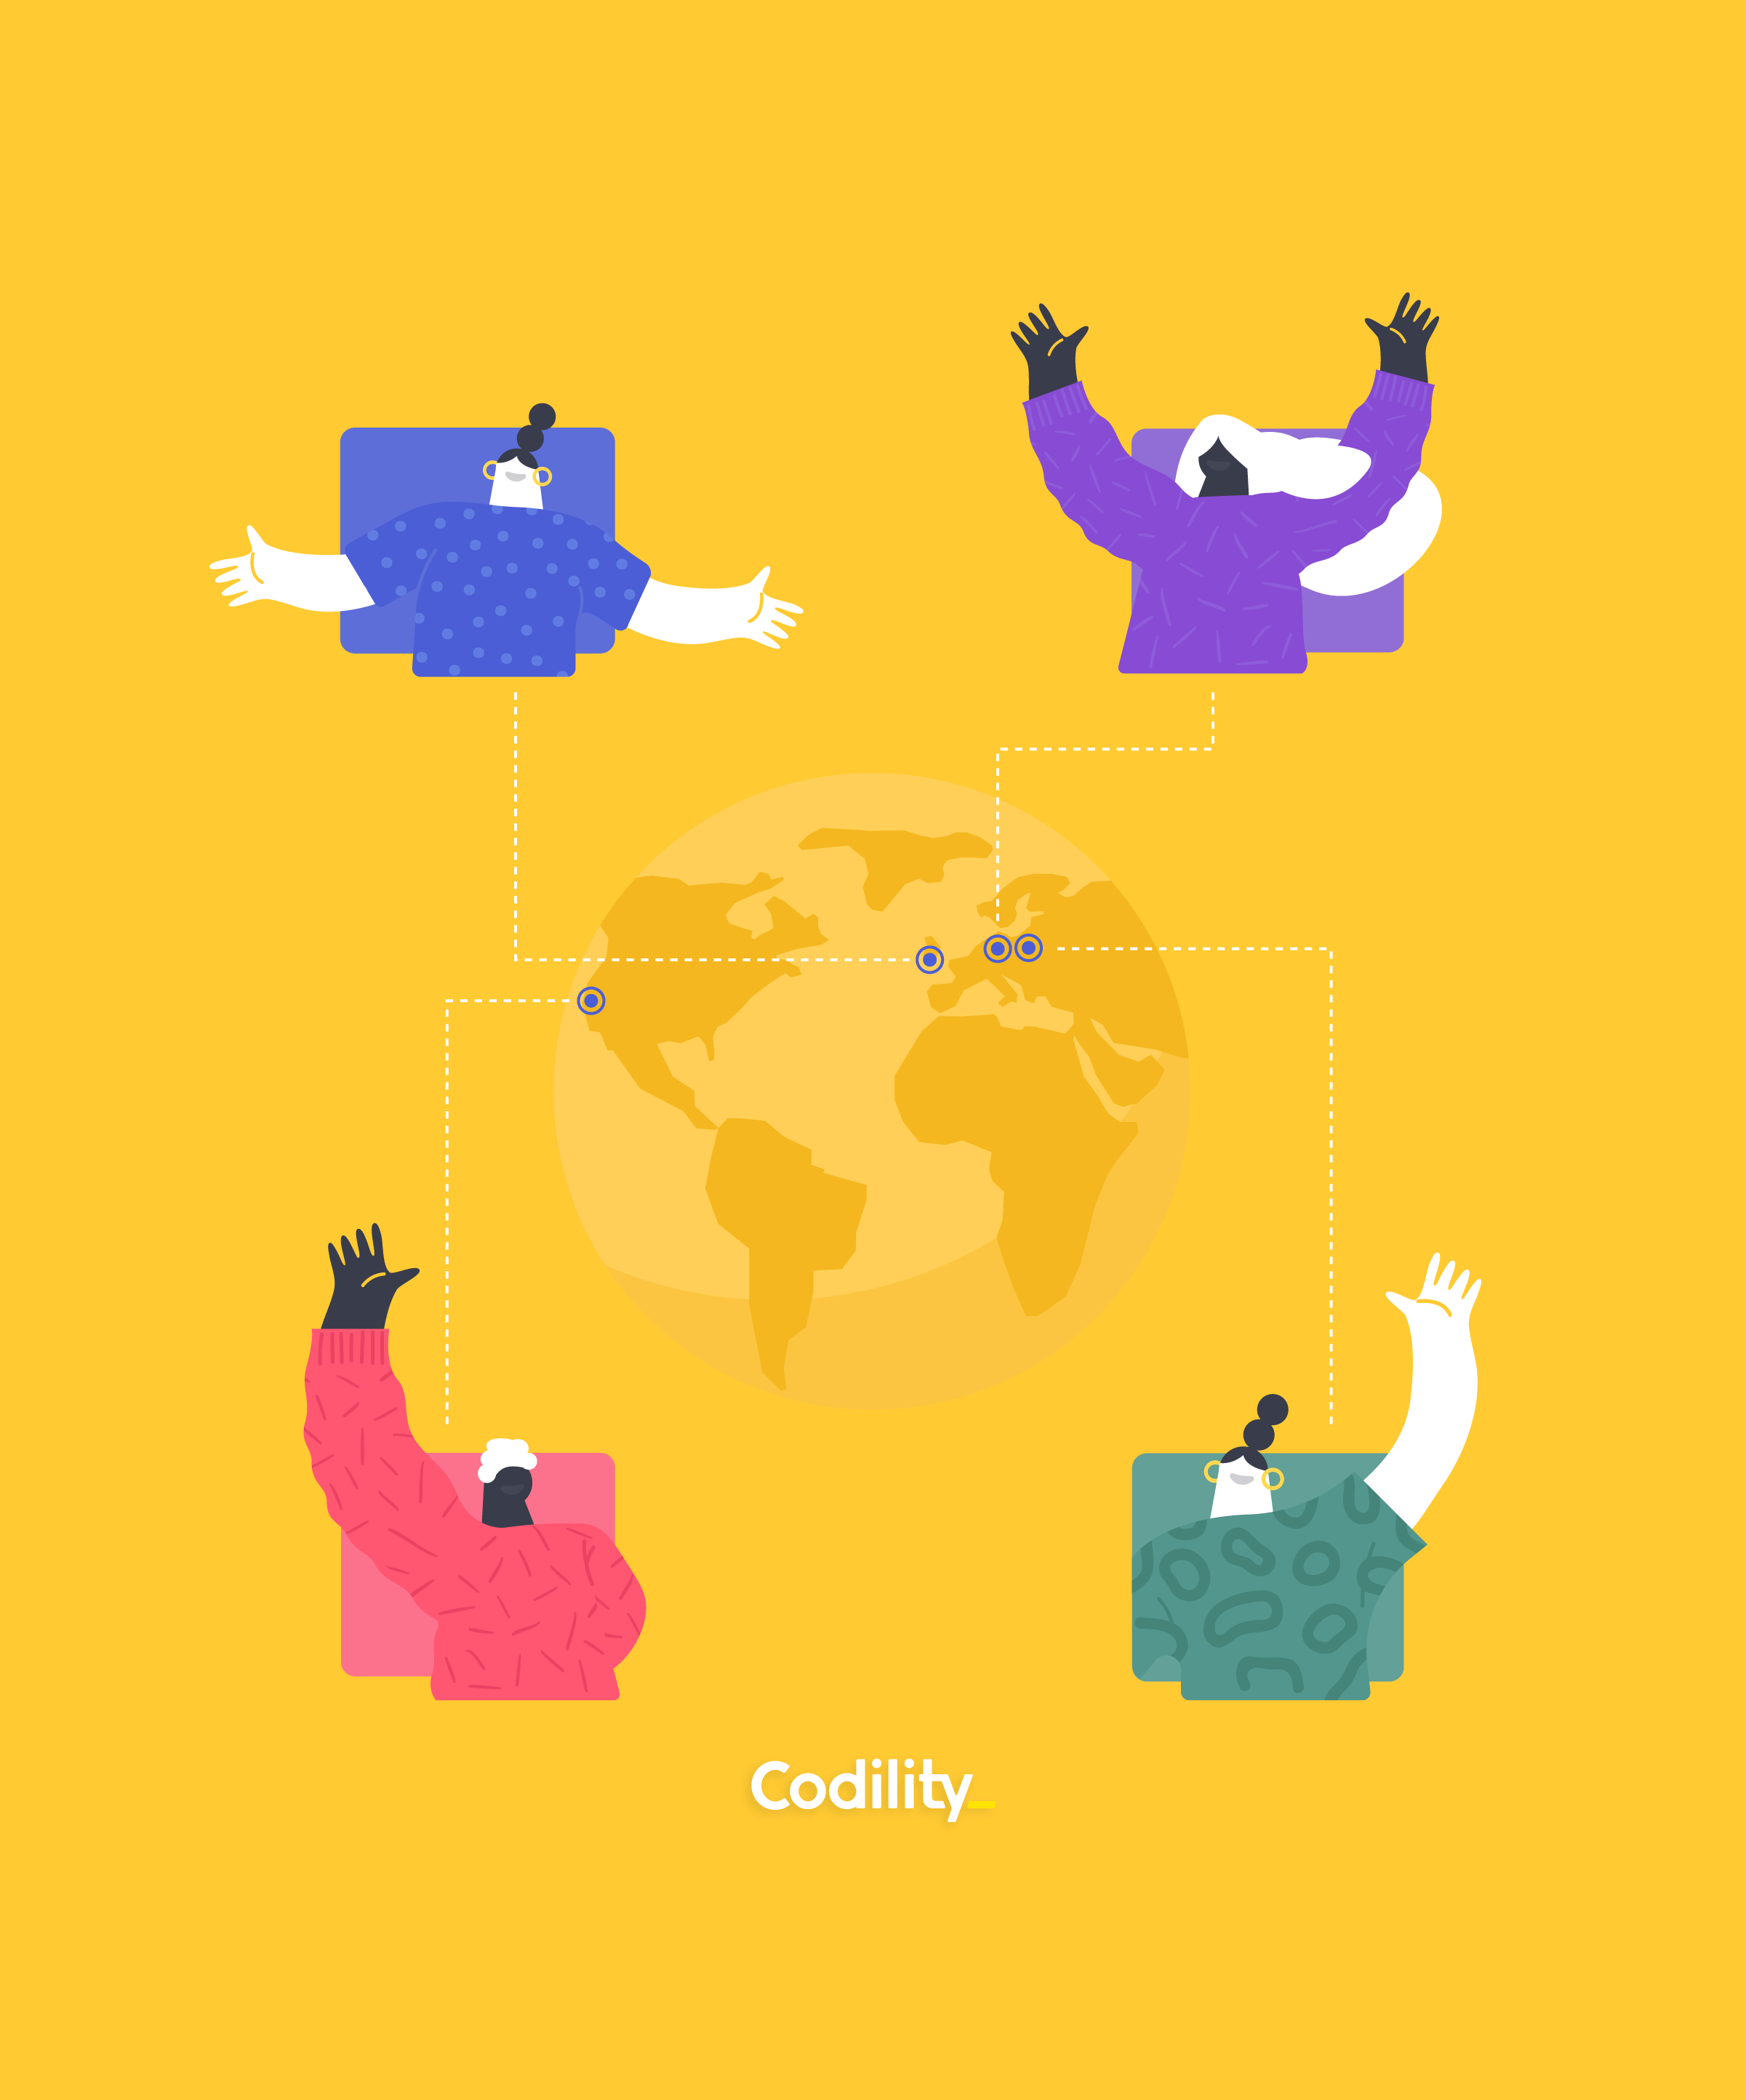 Codility excels at remote work and distributed teams